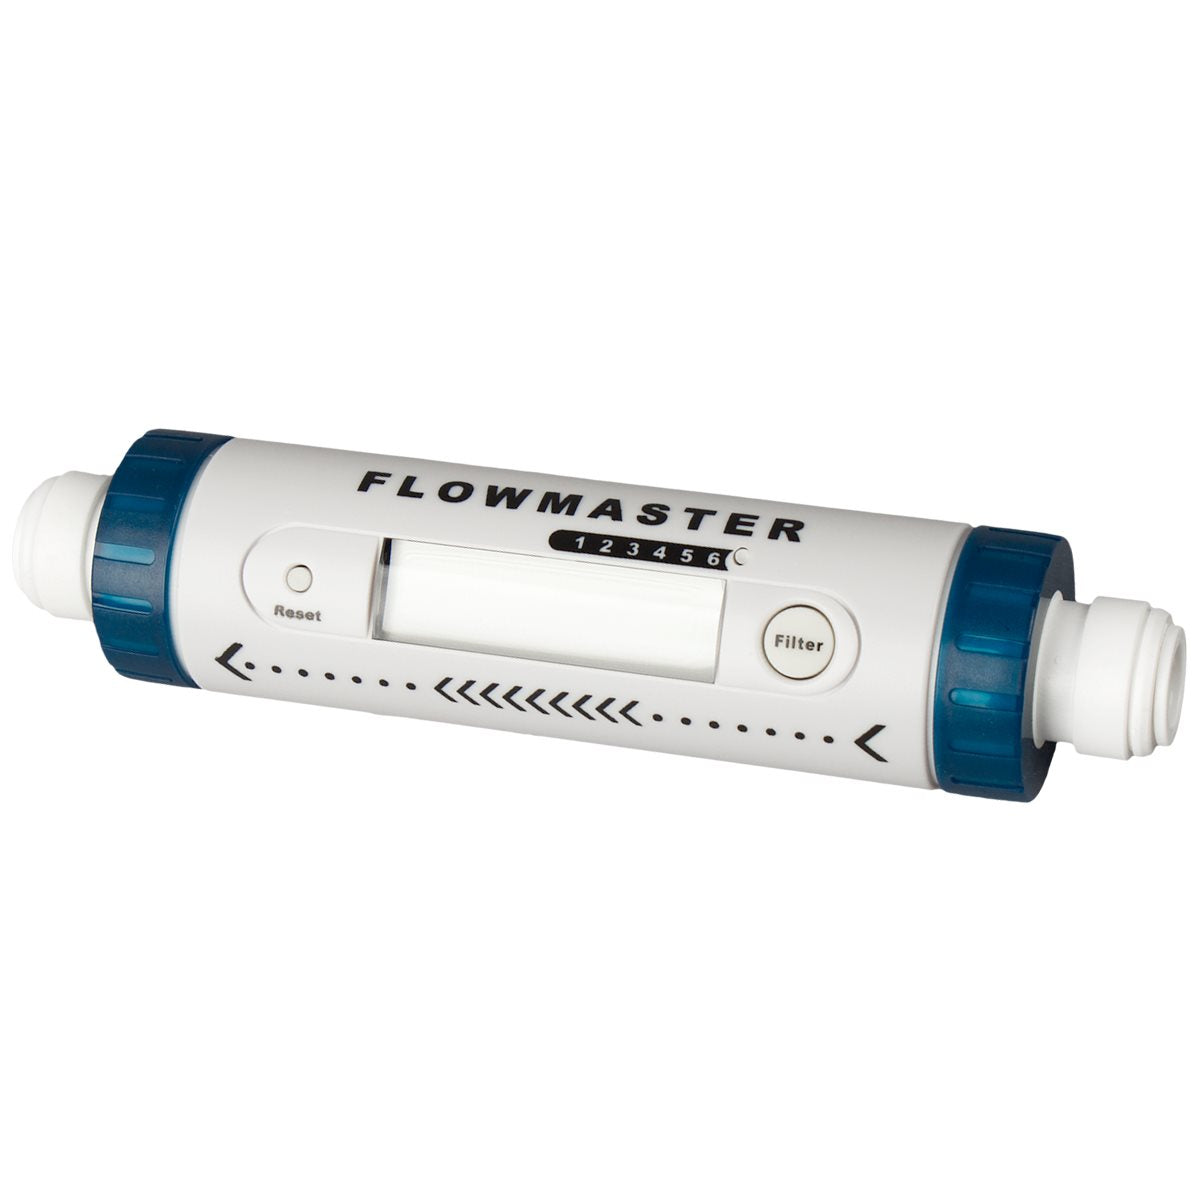 Product Image: Flowmaster Ultra Low Flow Modèle 1/4 in Hydro-Logic